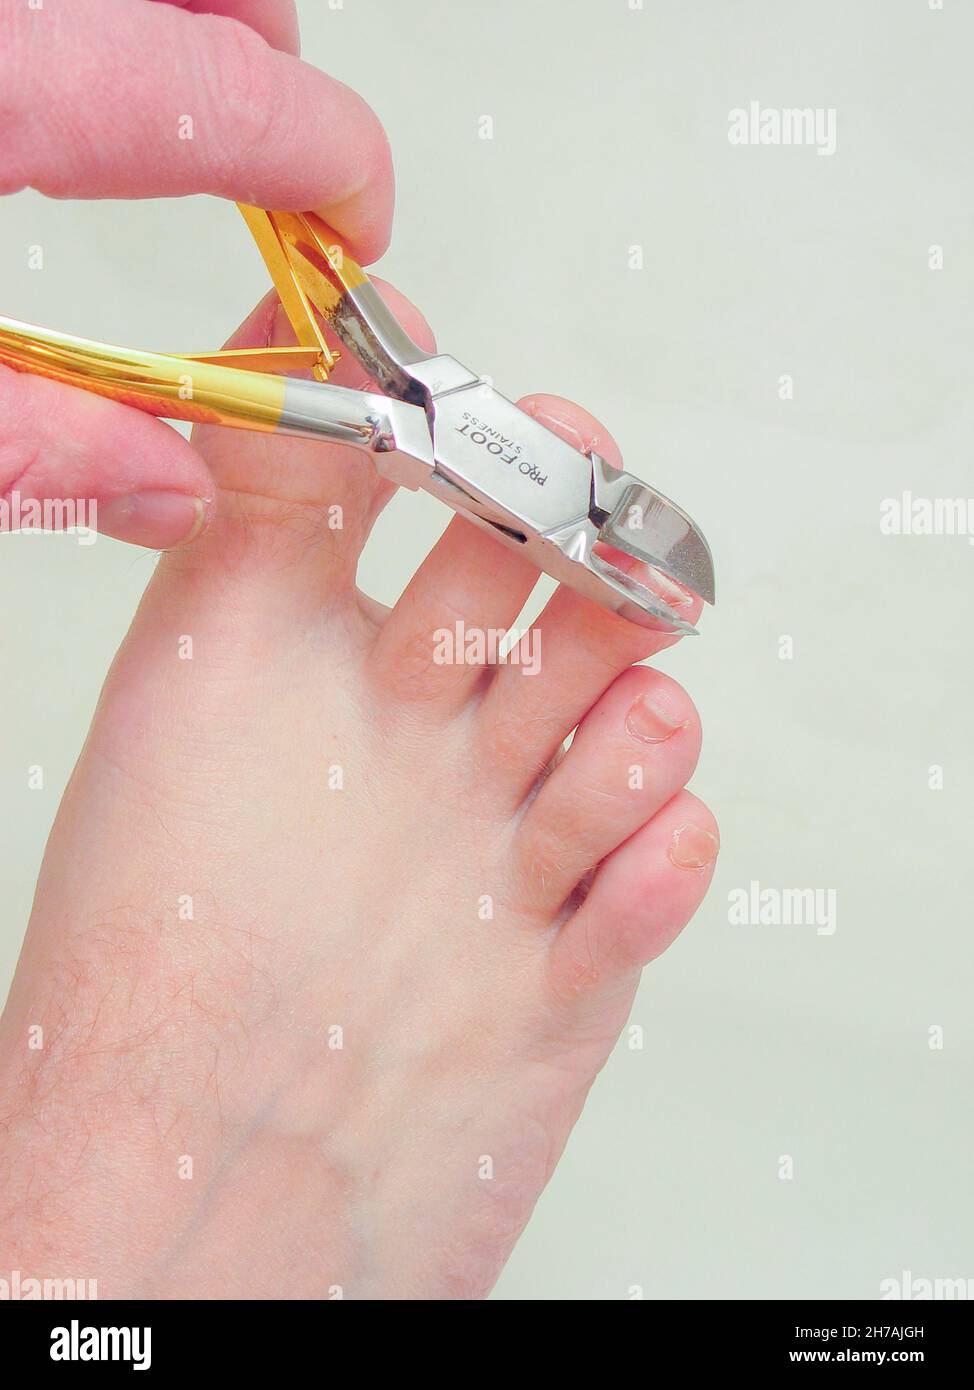 Toenail clippers in use. Stock Photo